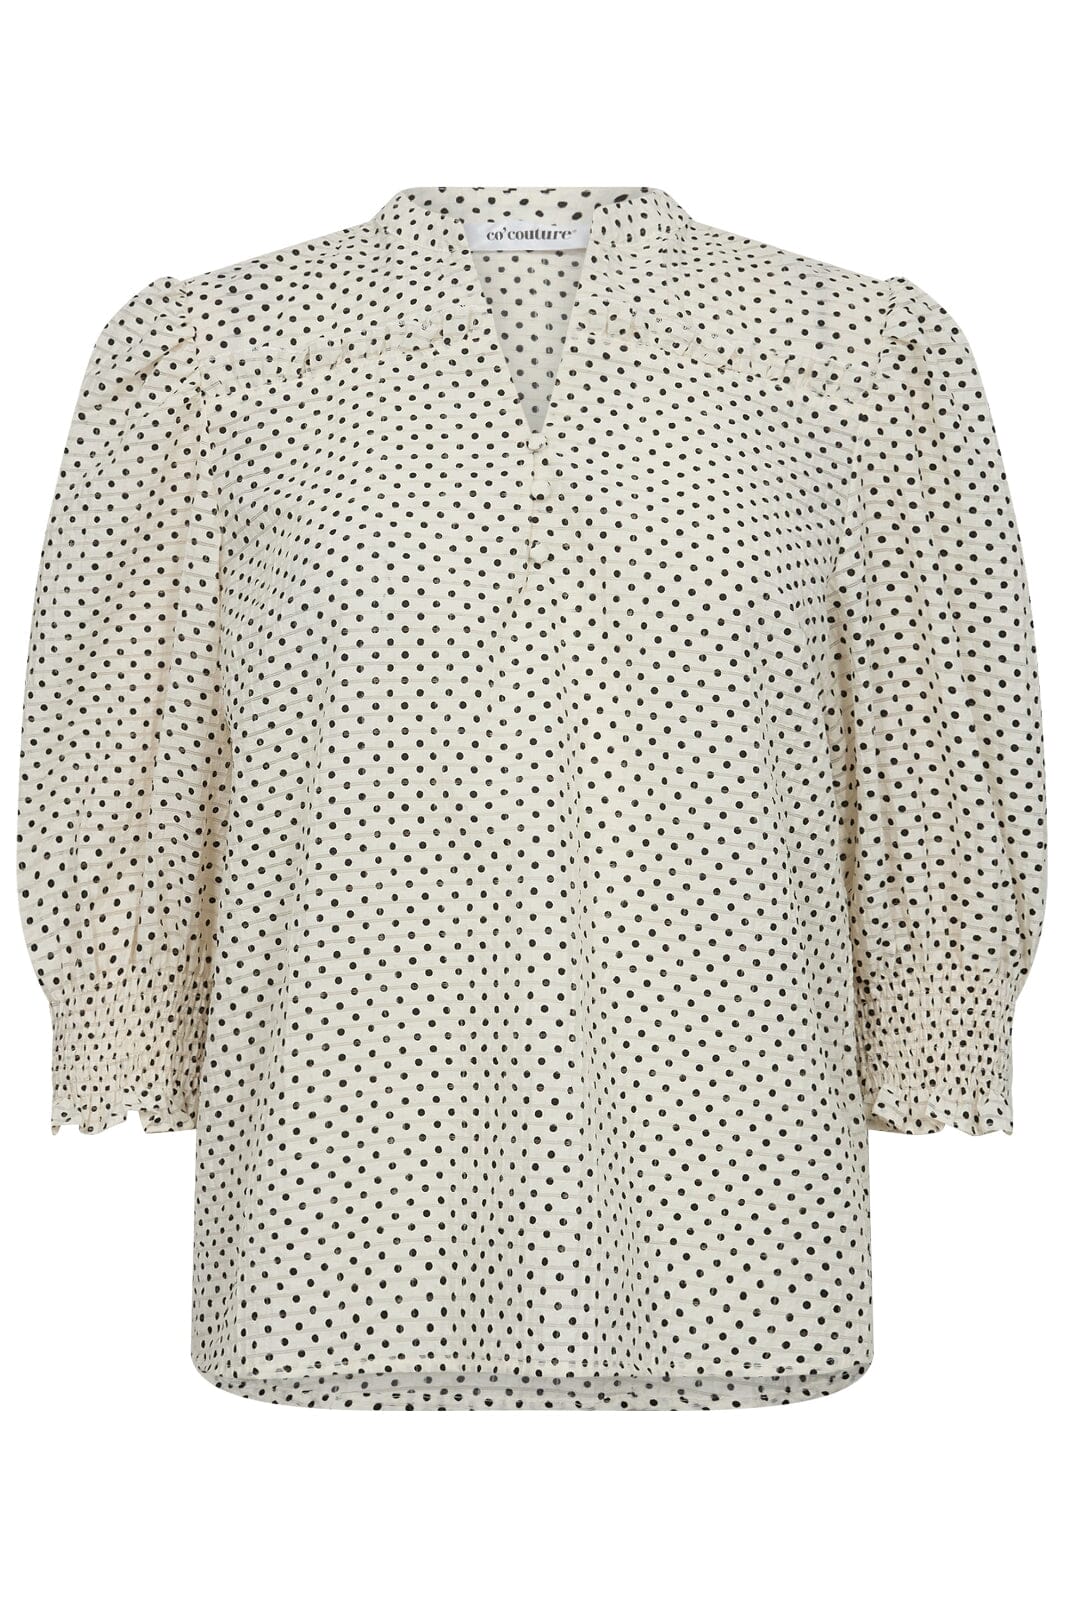 Co´couture - Chesscc Dot Ss Shirt 35434 - 11 Off White Bluser 